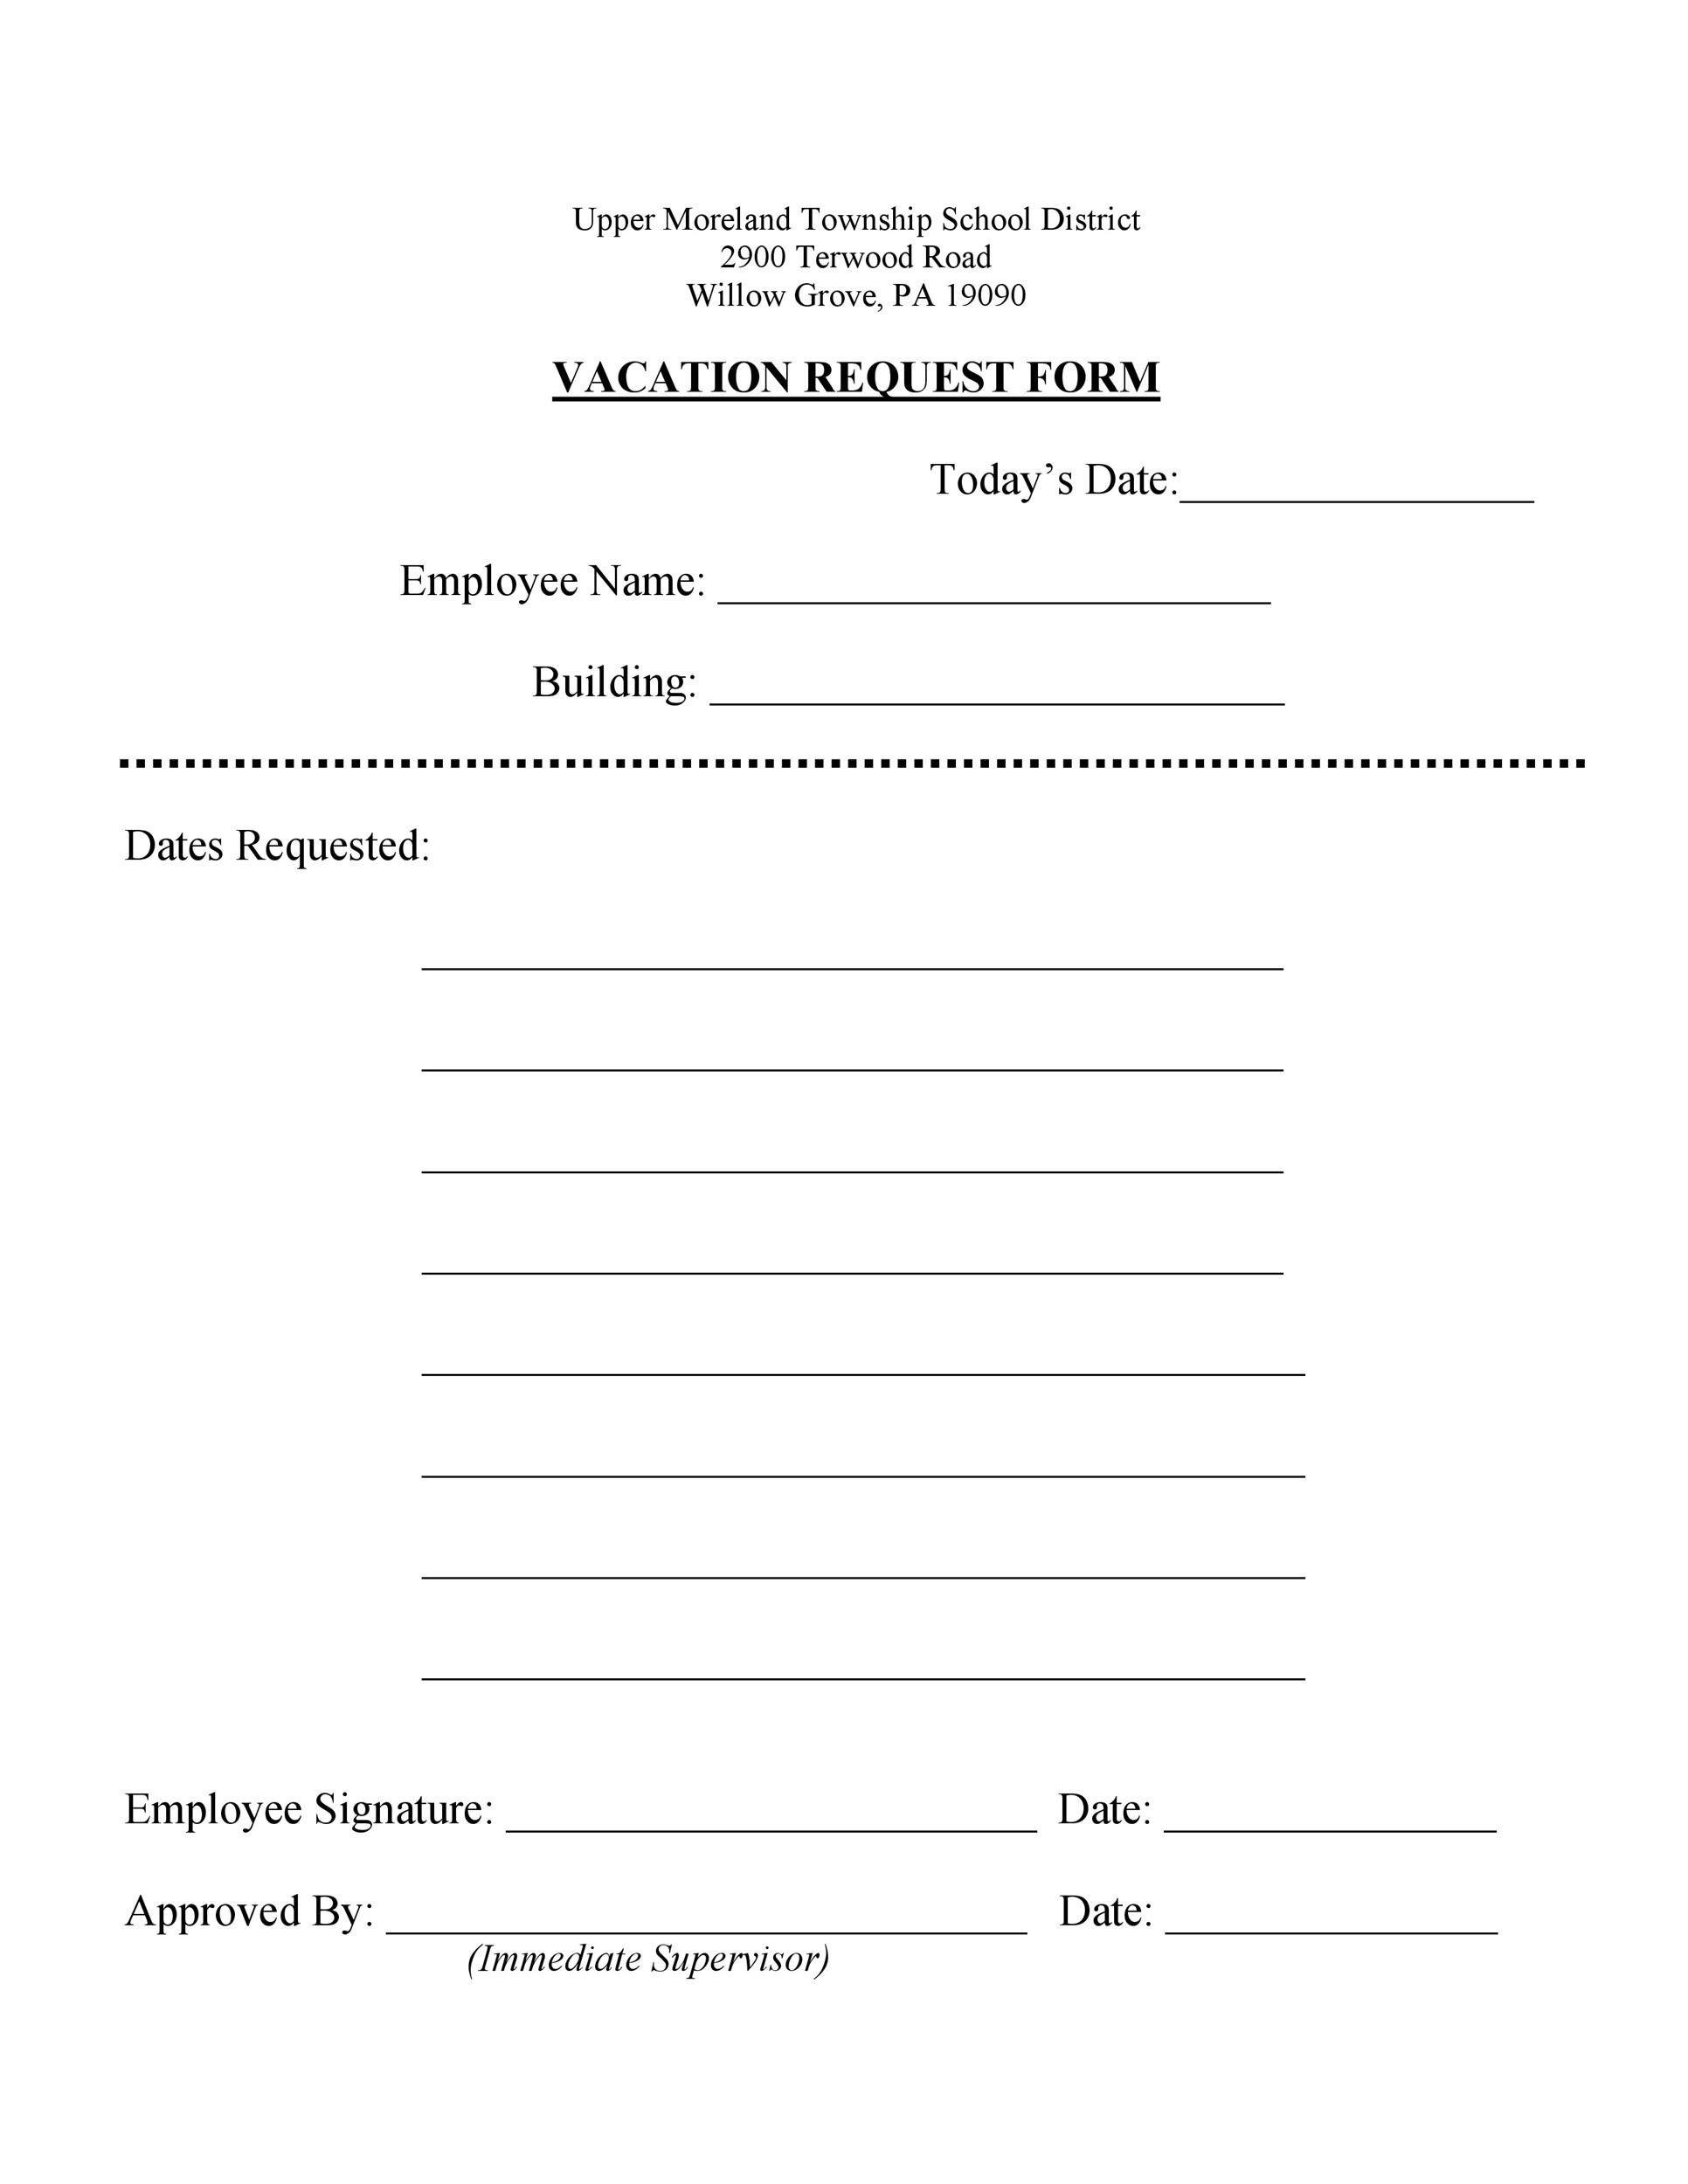 Free vacation request form 19